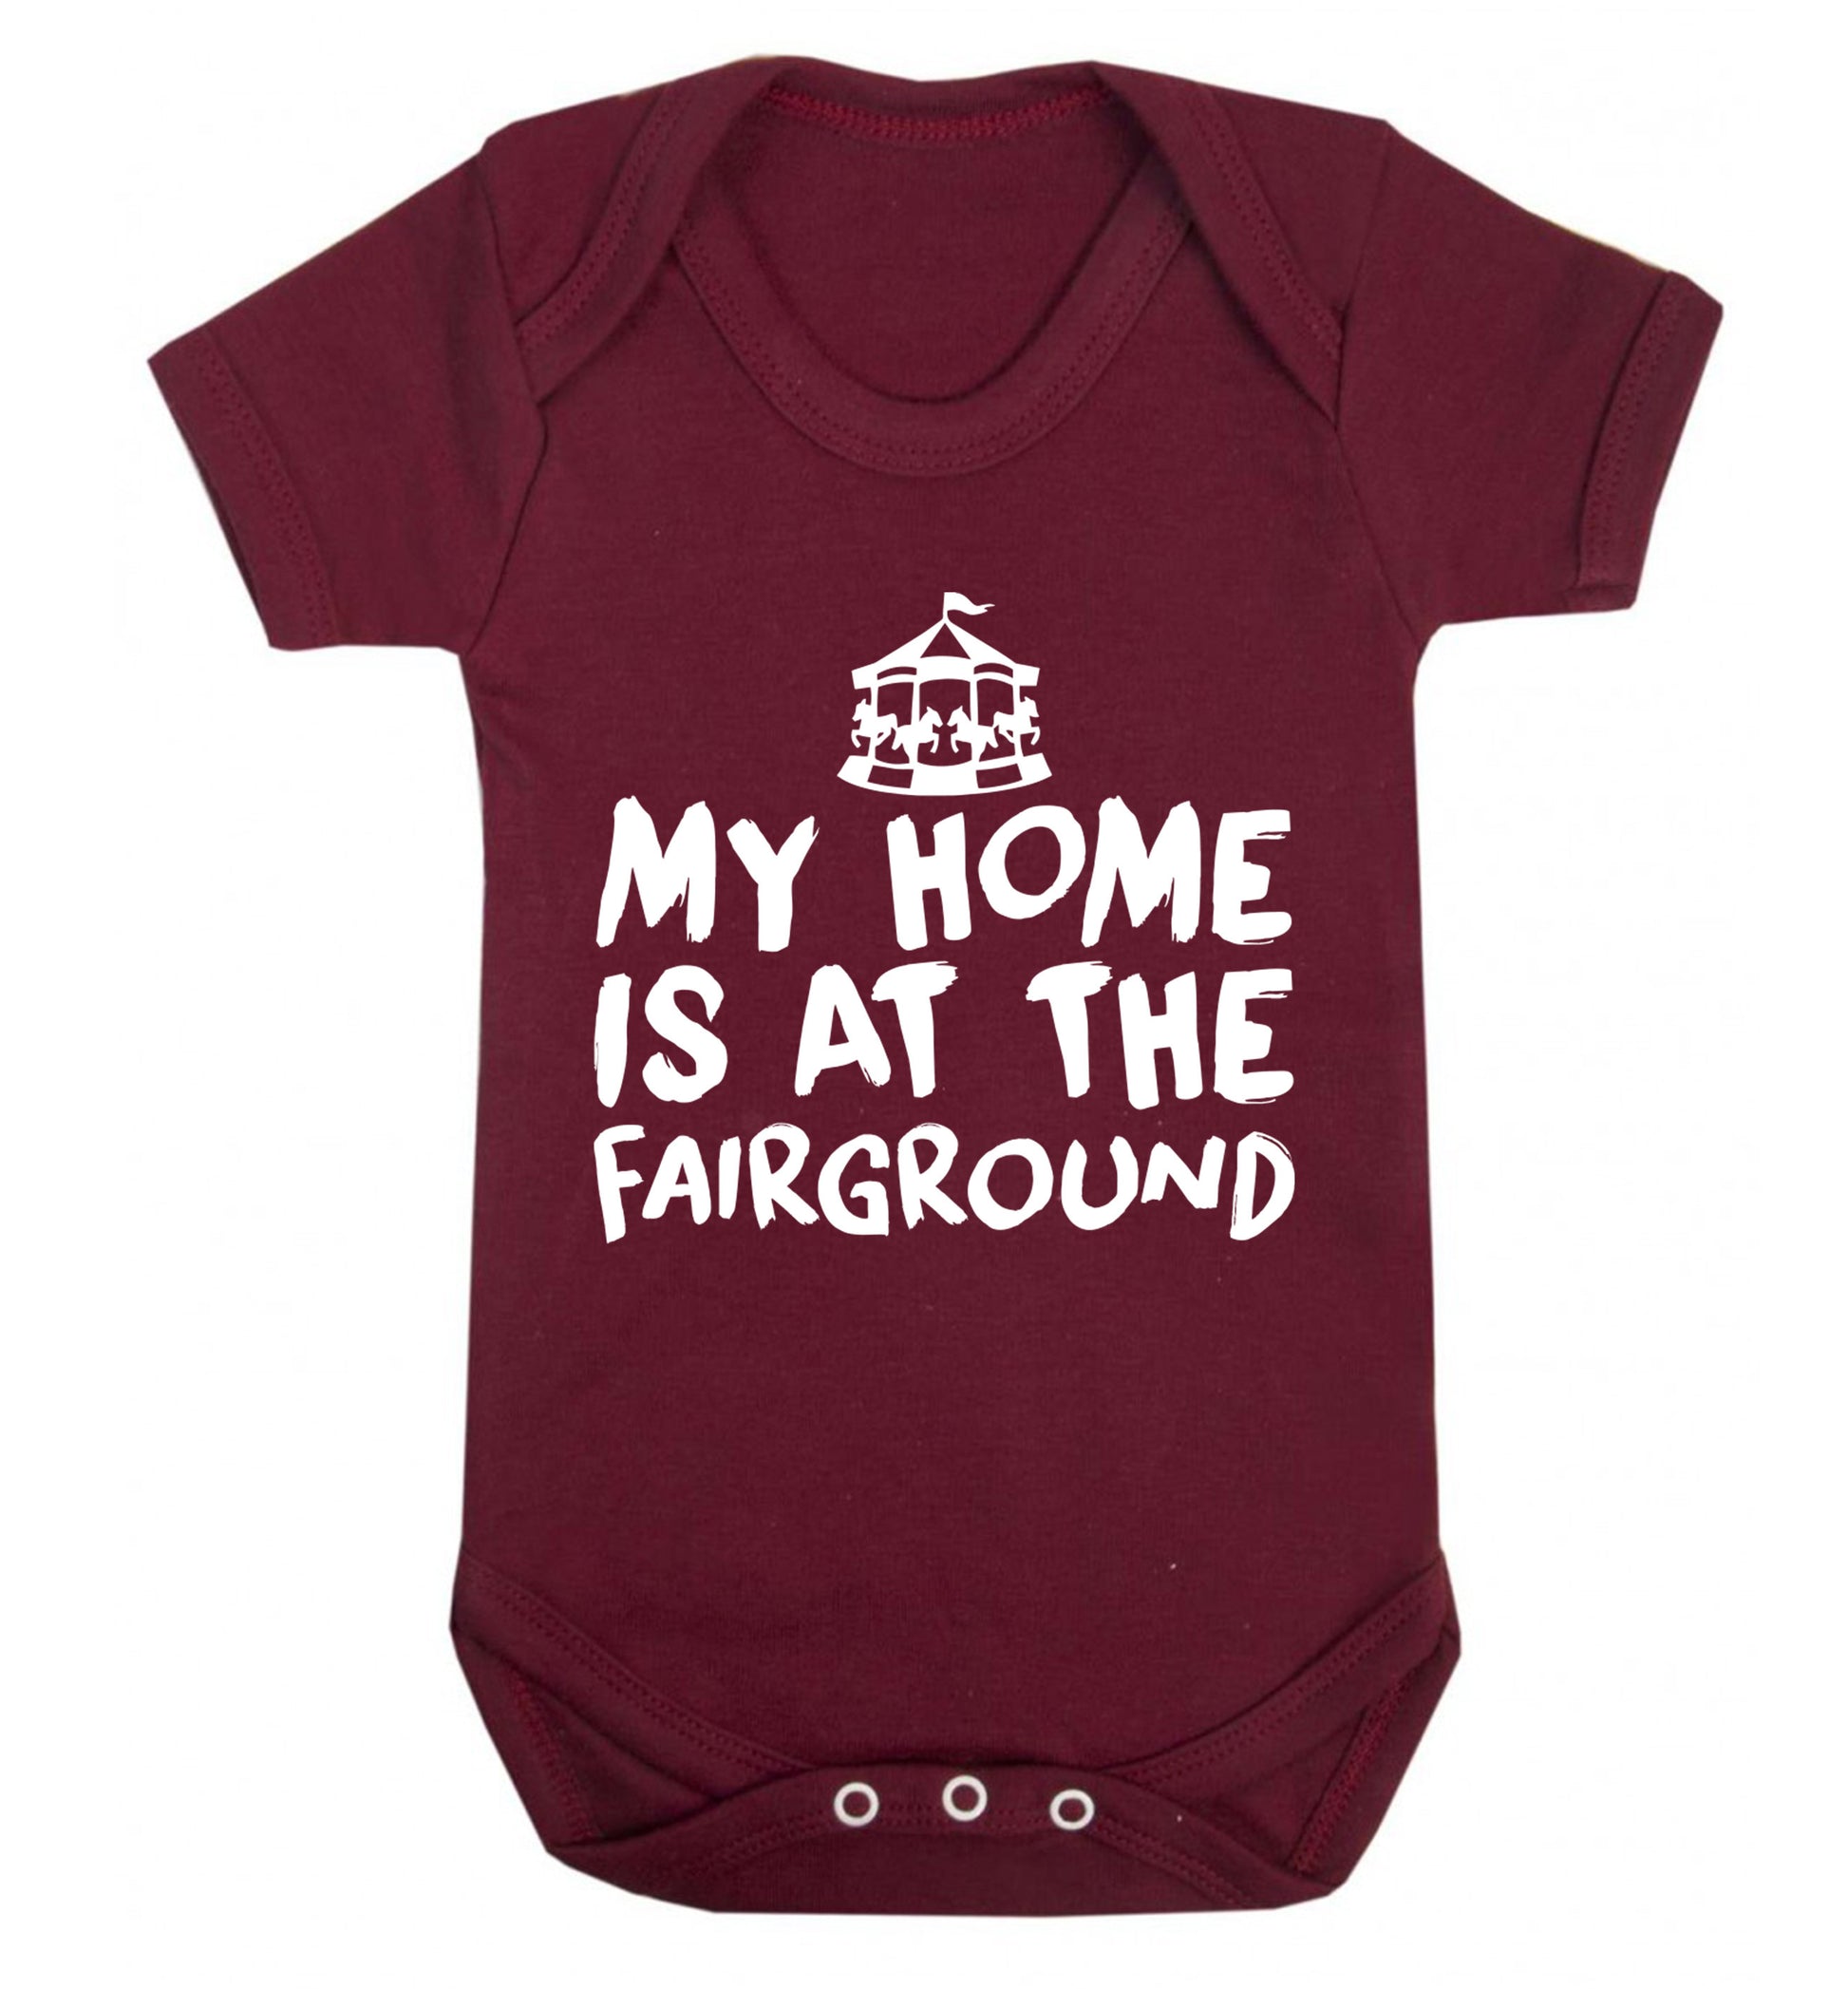 My home is at the fairground Baby Vest maroon 18-24 months